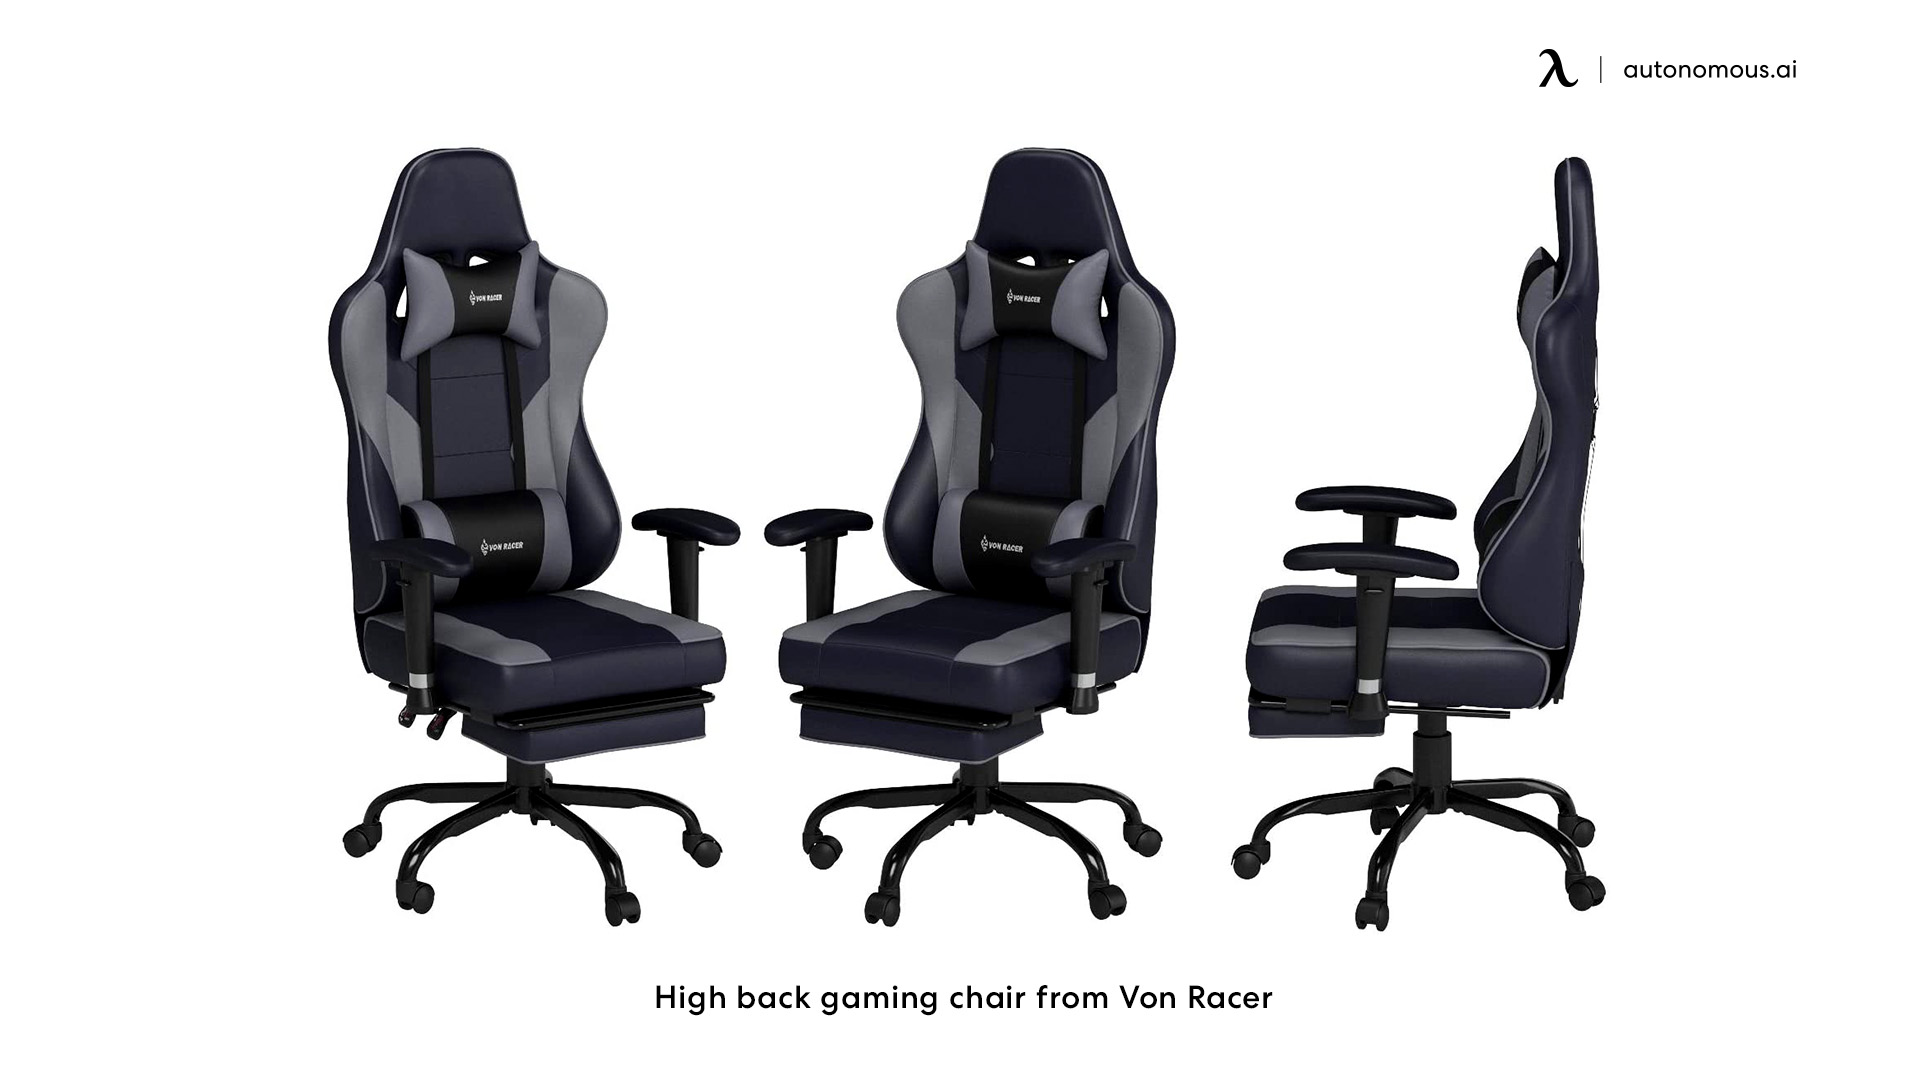 High back gaming chair from Von Racer